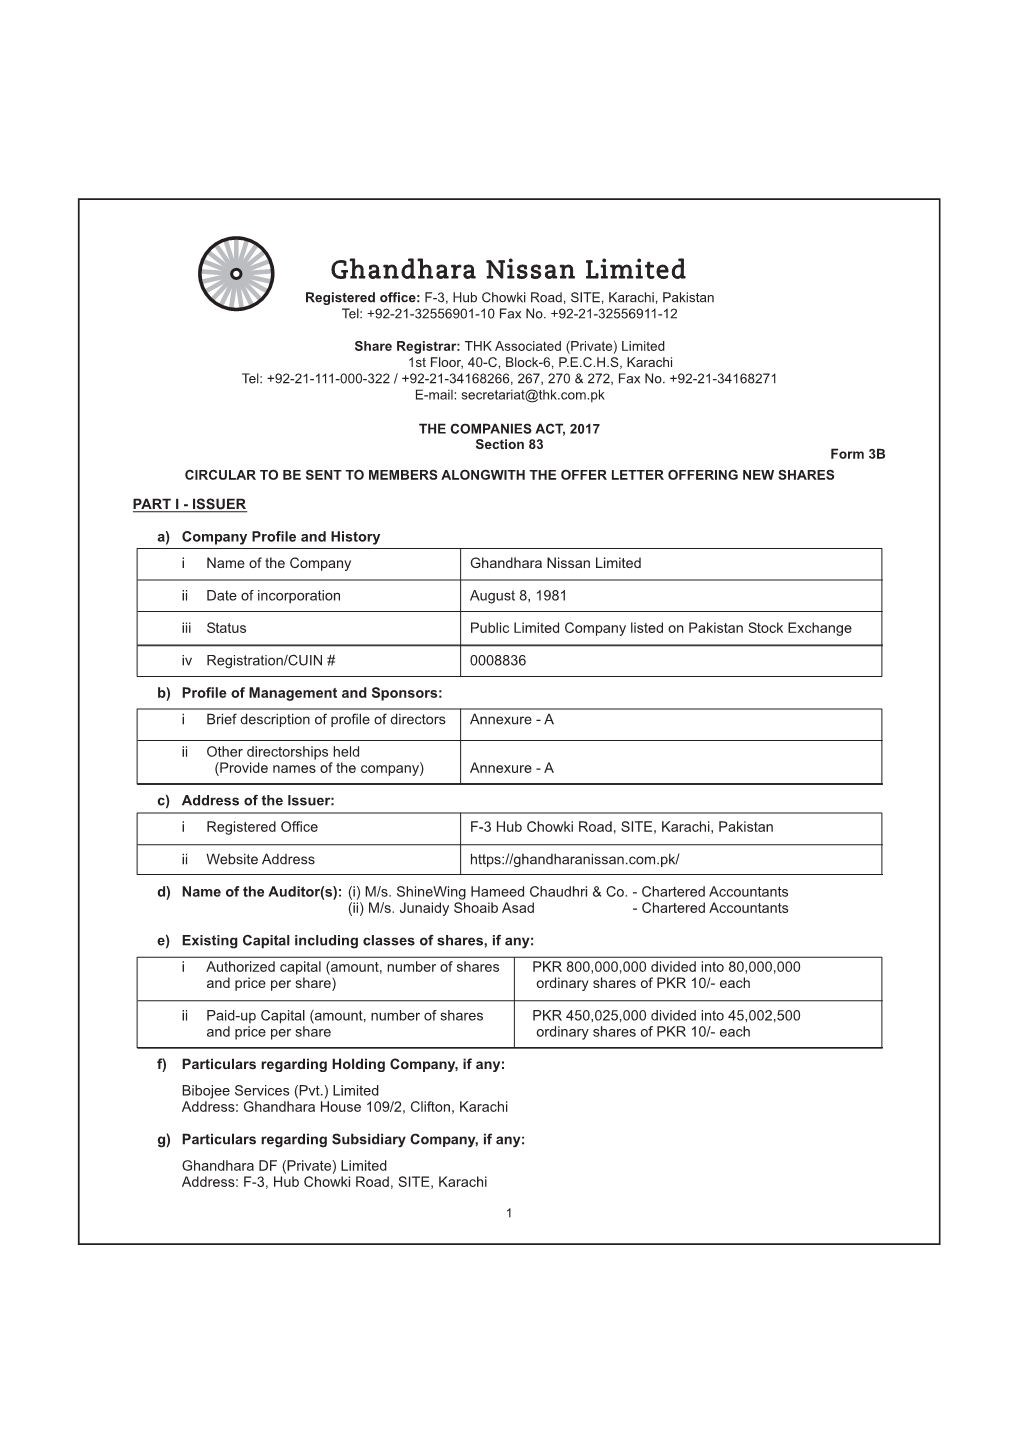 Circular to Be Sent to Members Alongwith the Offer Letter Offering New Shares